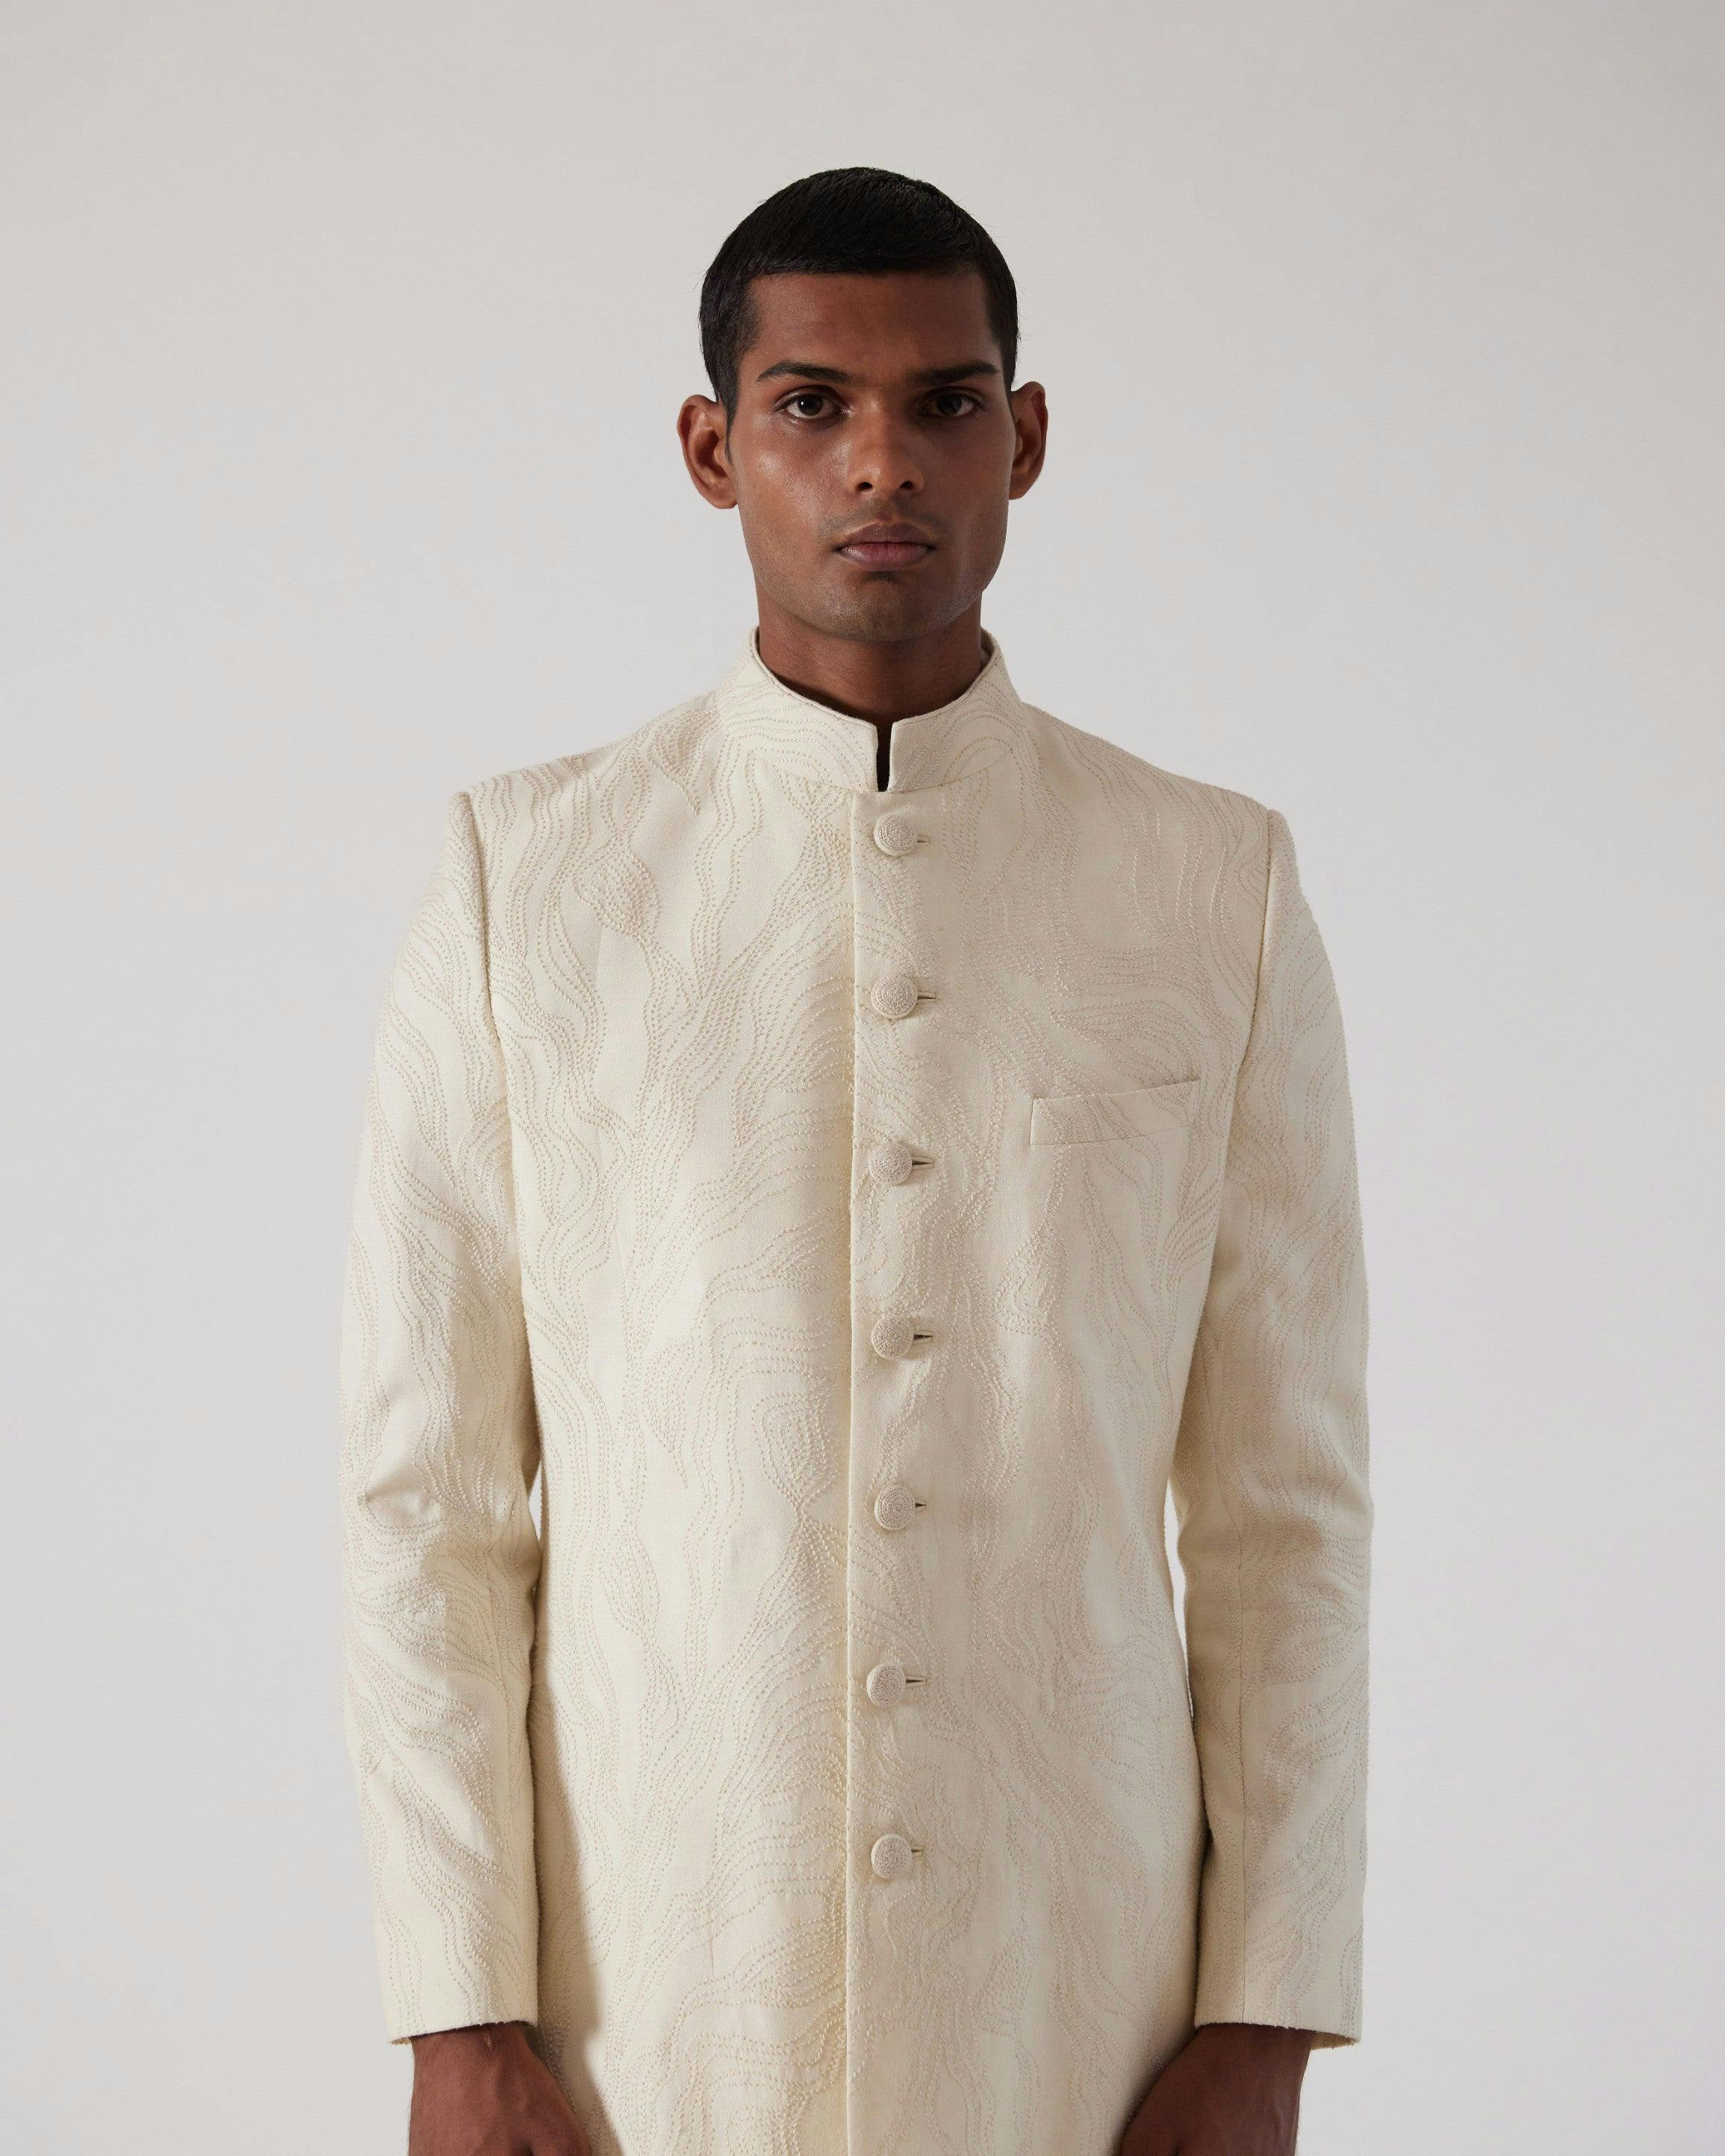 Thumbnail preview #2 for Infinity Embroidered Sherwani